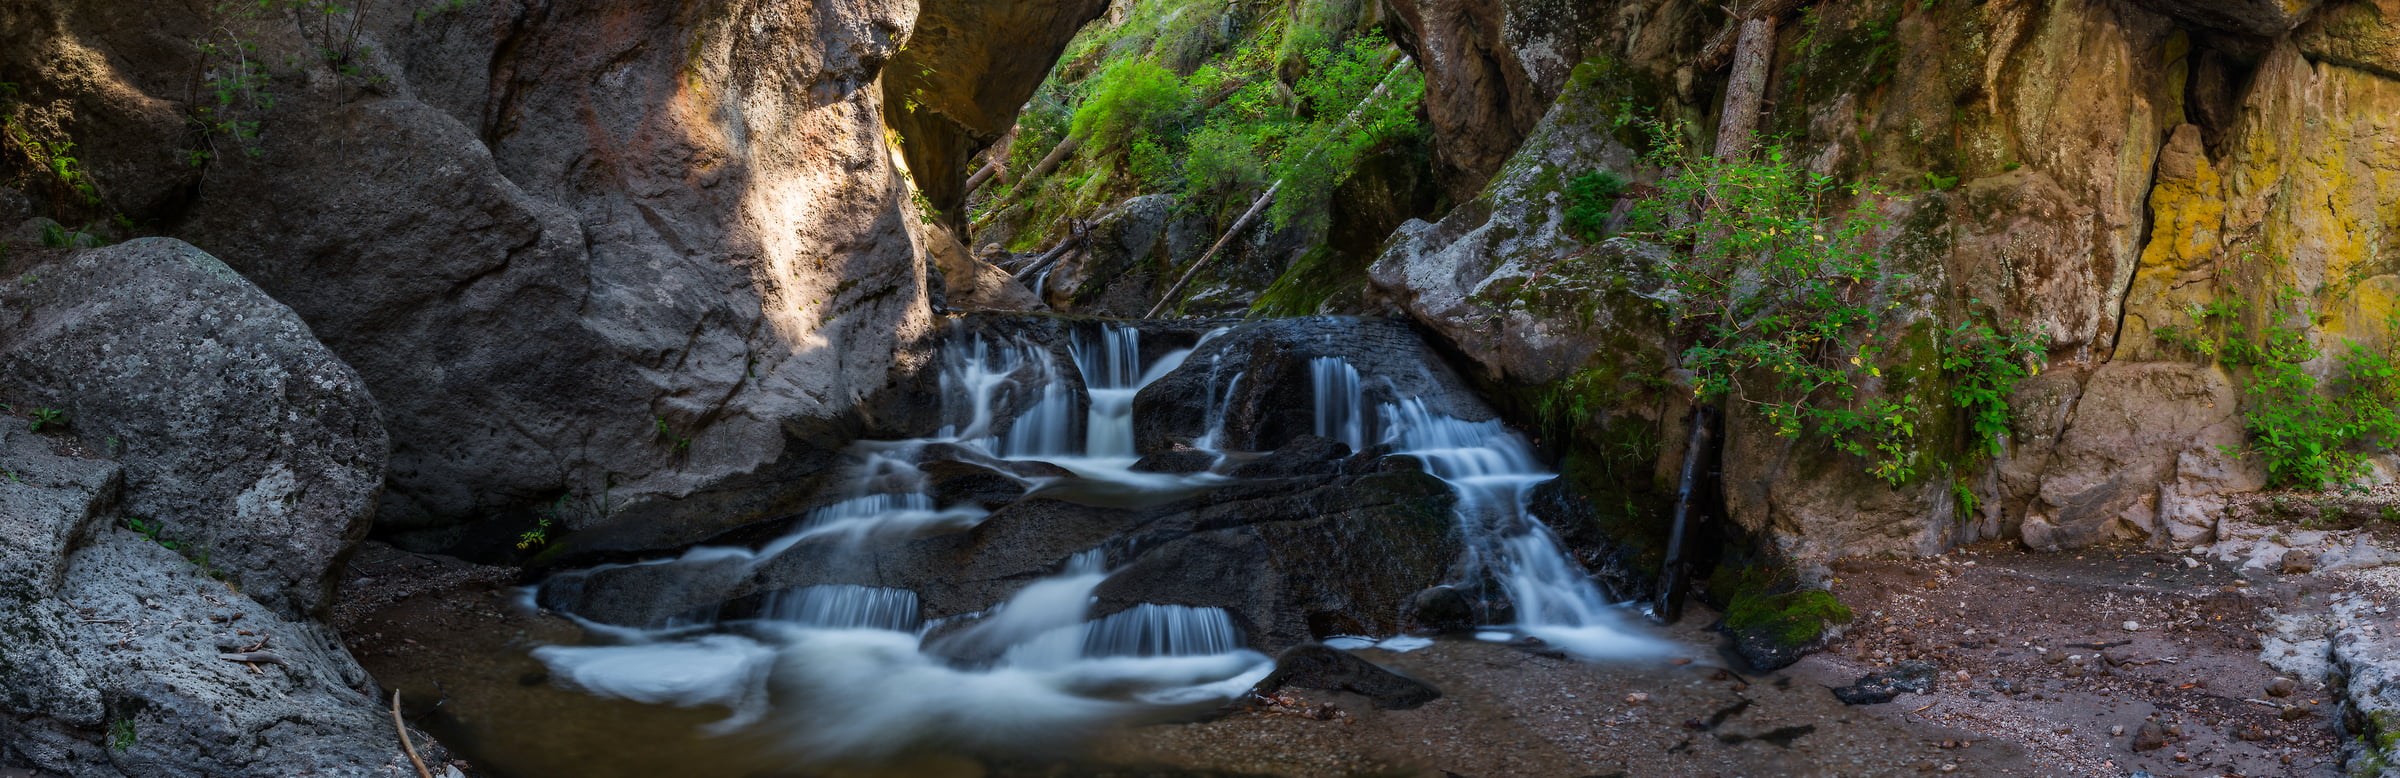 106 megapixels! A very high resolution, large-format VAST photo print of falling water over rocks; nature photograph created by Phillip Noll in Jemez Mountains, New Mexico